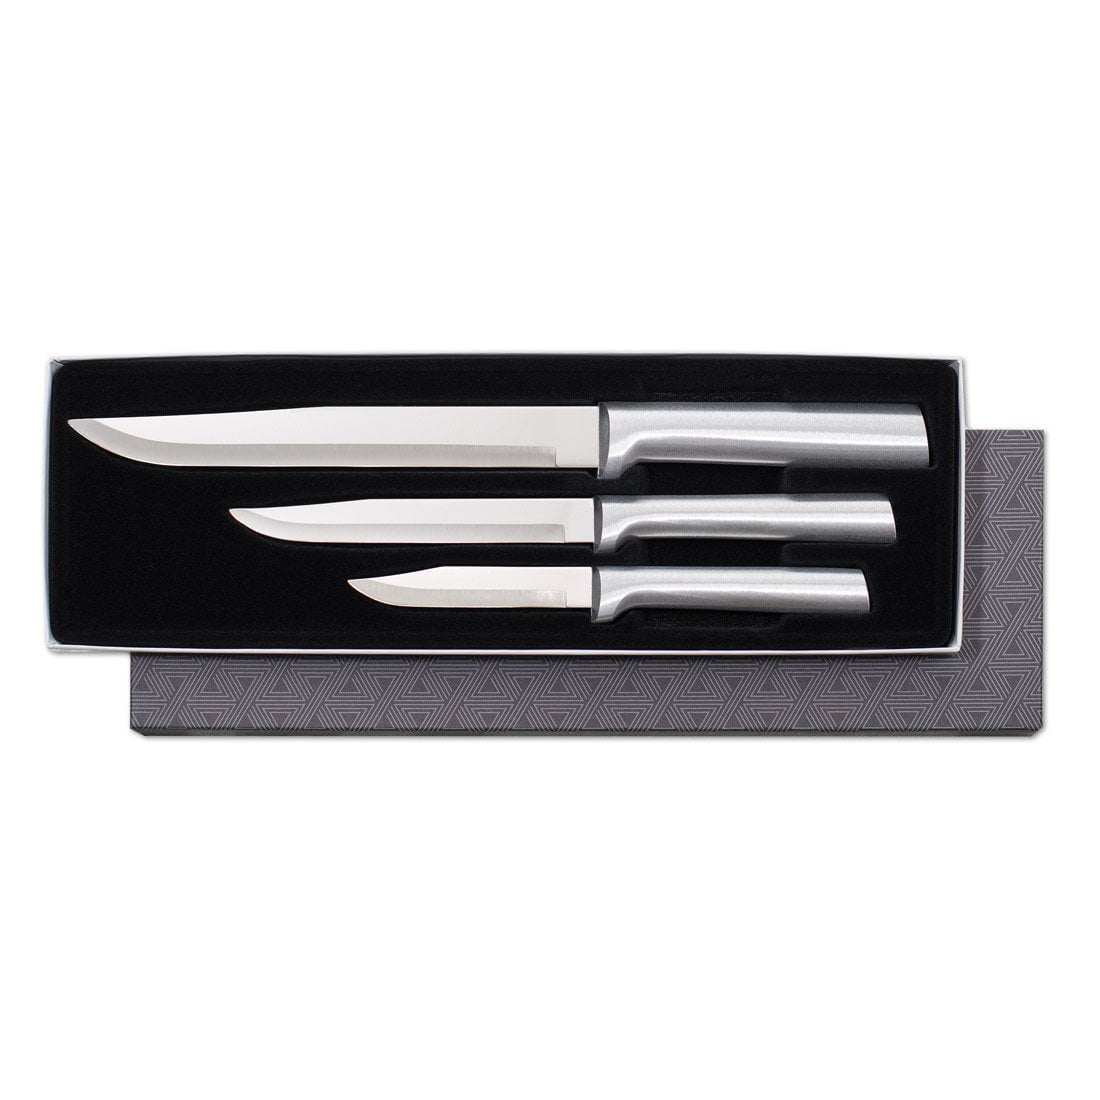  Rada Cutlery Knife 7 Stainless Steel Kitchen Knives Starter  Gift Set with Brushed Aluminum Made in USA, Silver Handle: Boxed Knife  Sets: Home & Kitchen